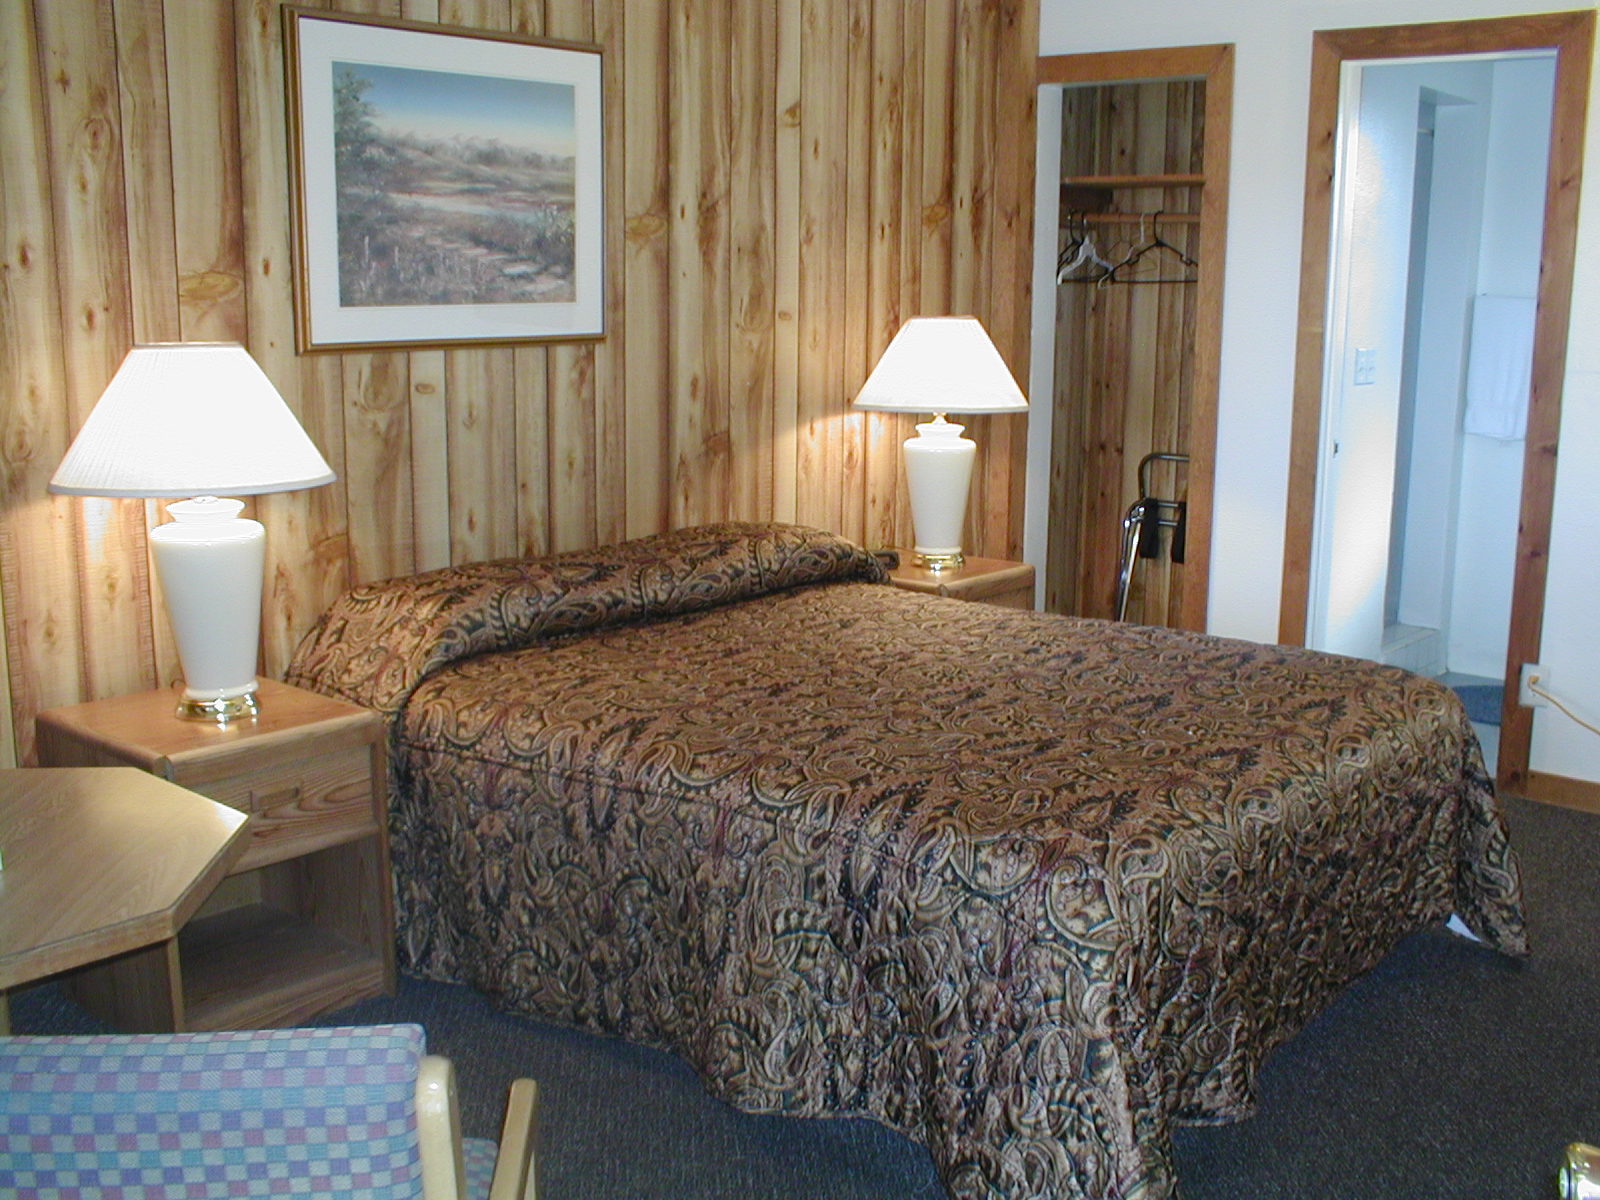 motel room with wood panelling, double bed and wooden nightstands with a lamp on each